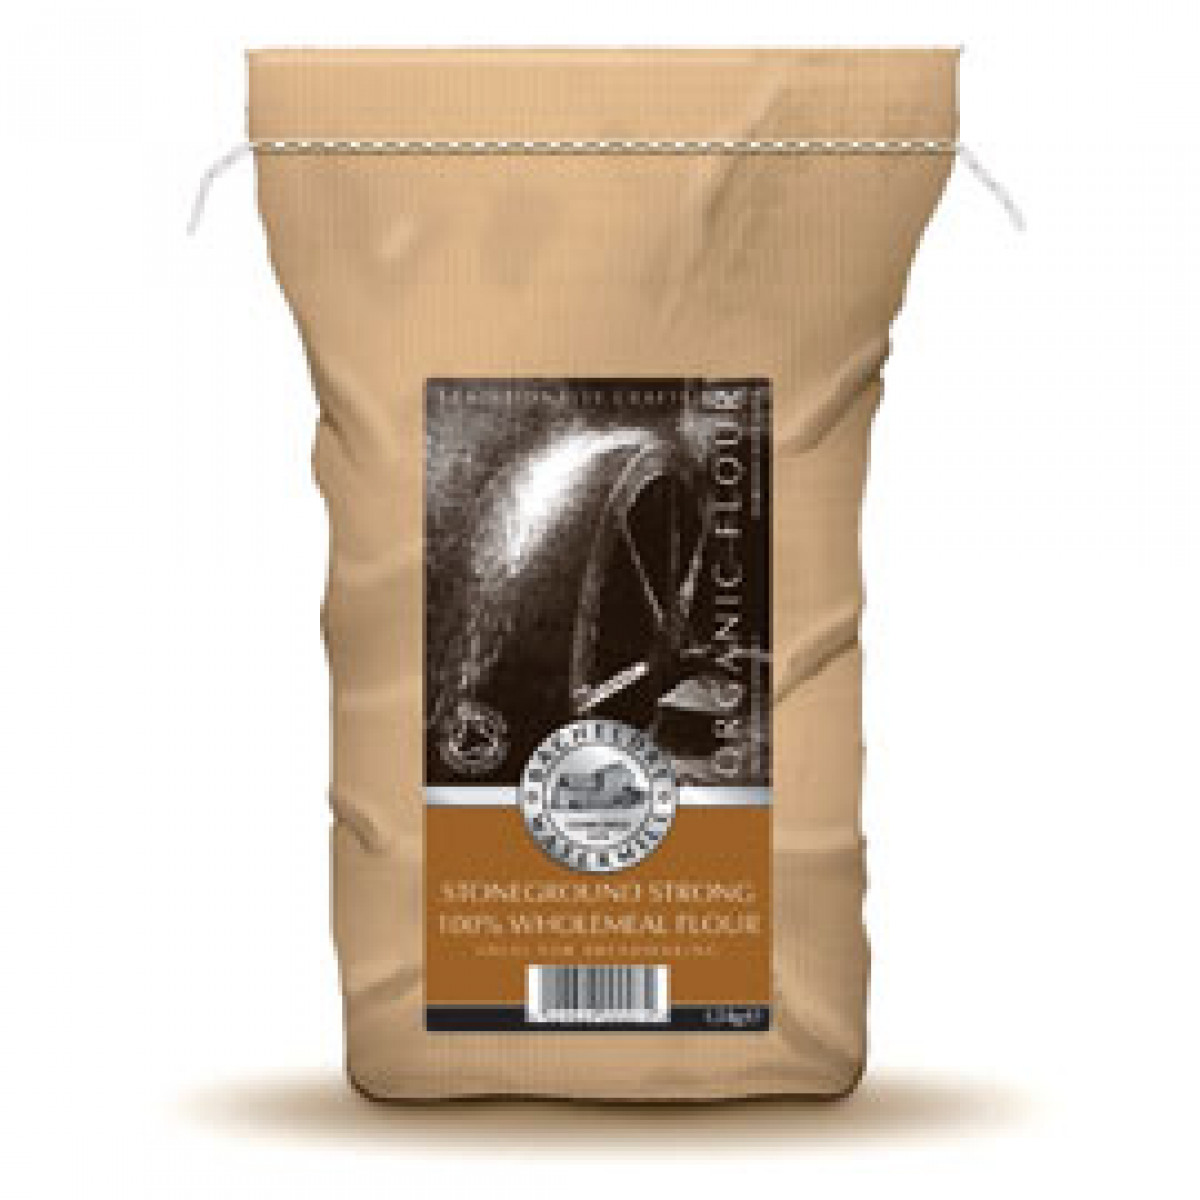 Product picture for Stoneground Strong 100% Wholemeal Flour